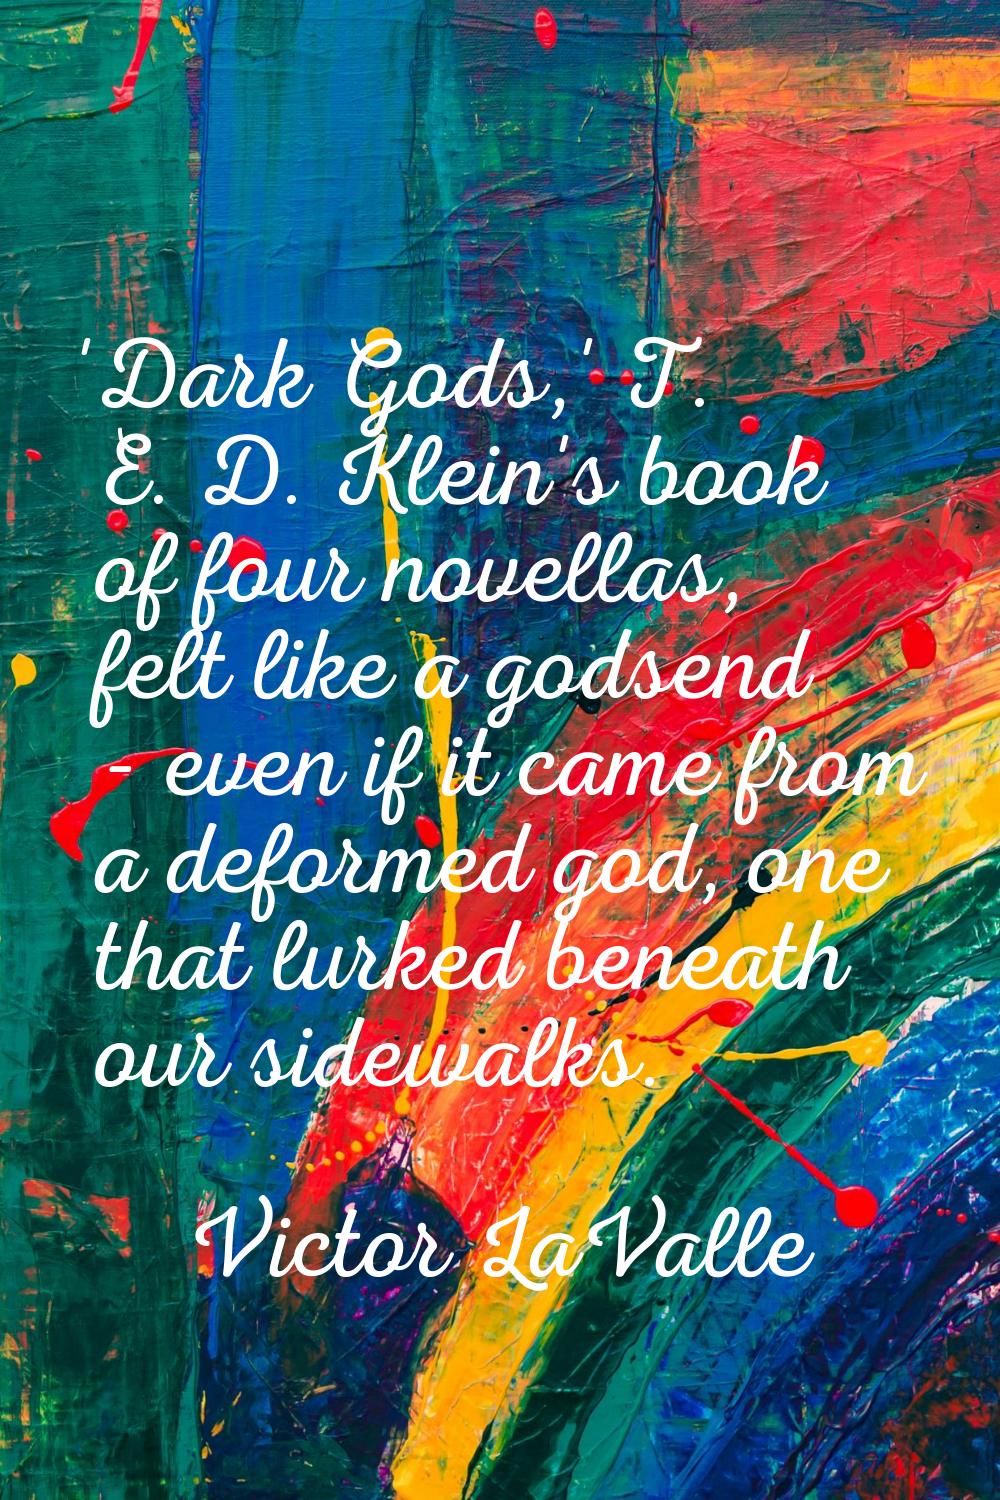 'Dark Gods,' T. E. D. Klein's book of four novellas, felt like a godsend - even if it came from a d